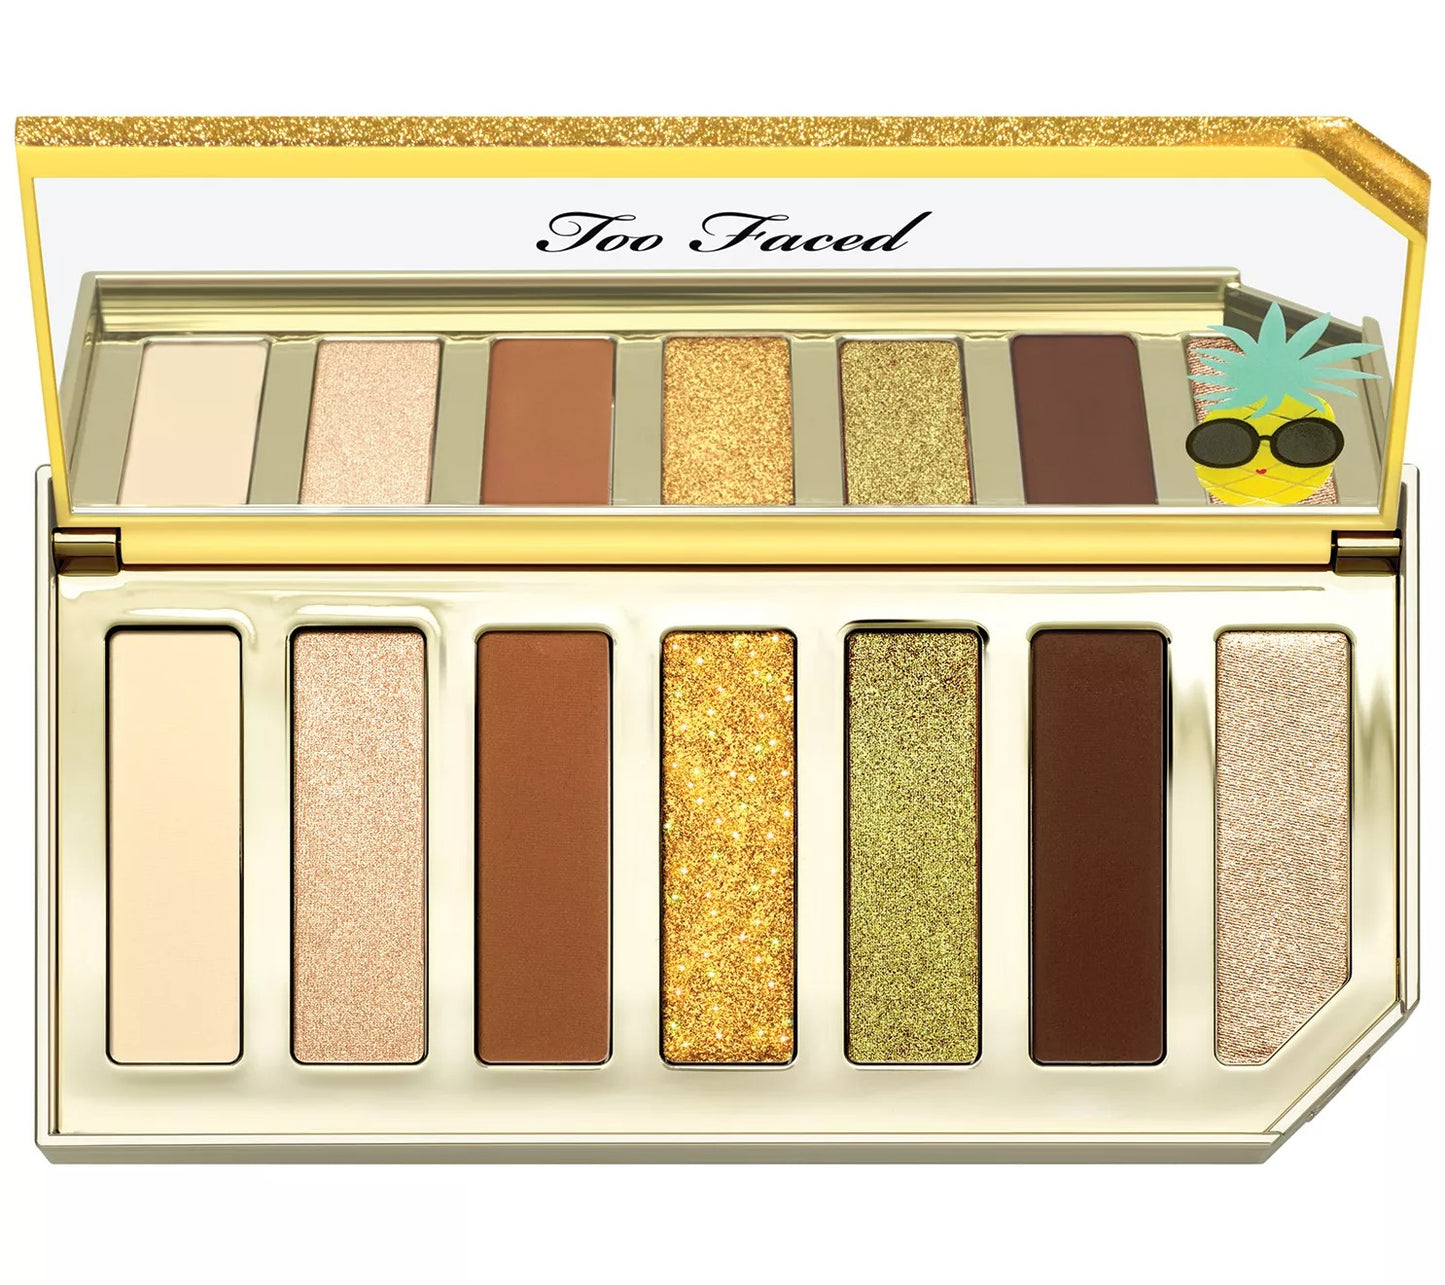 Too Faced Sparkling Pineapple Eye Shadow Palette